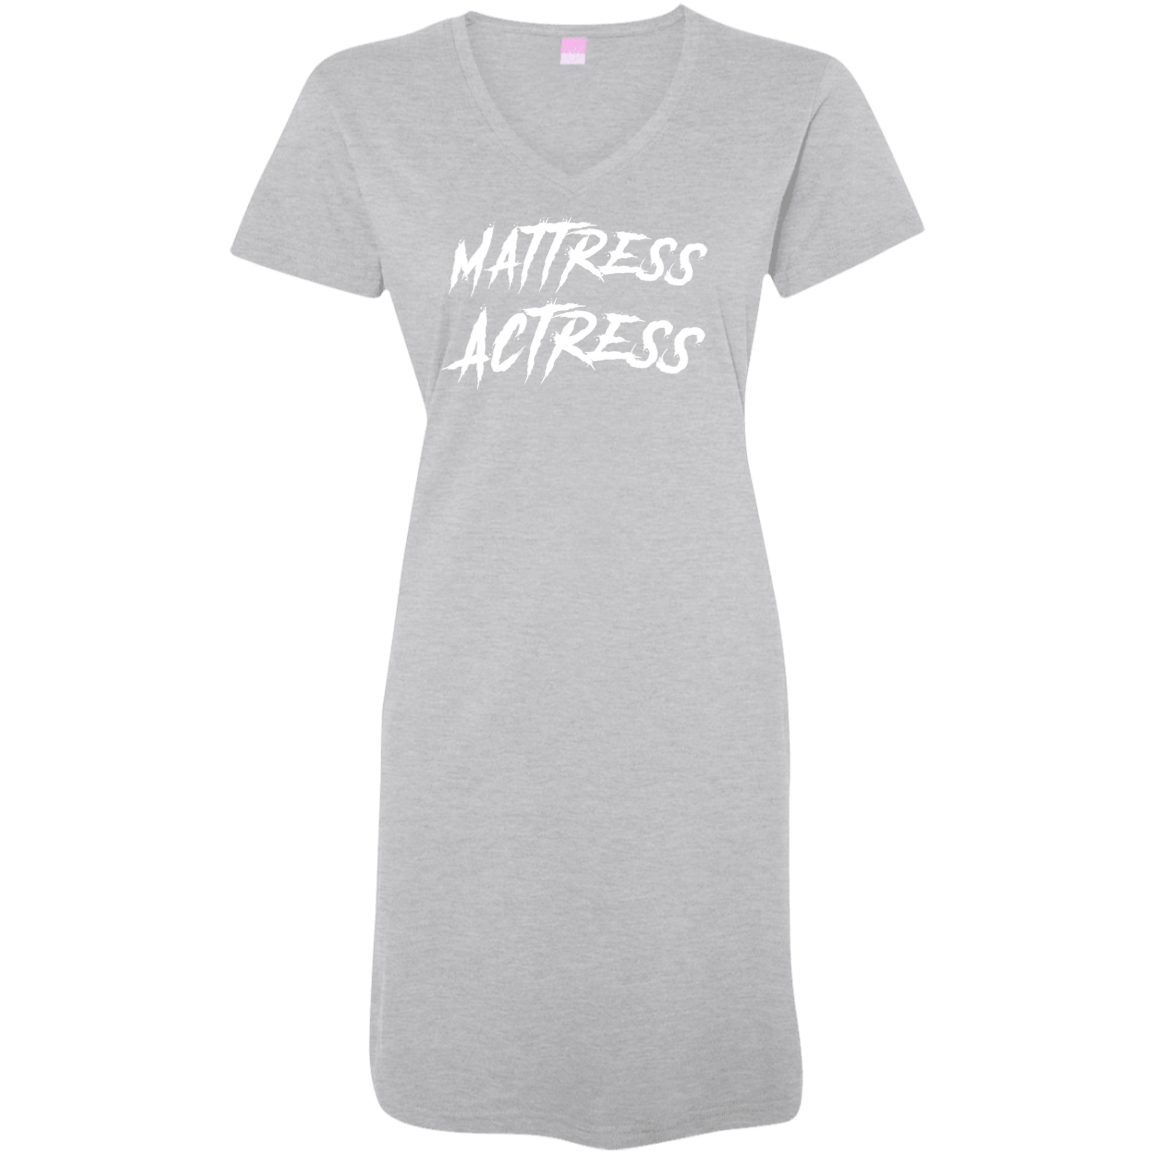 "Mattress Actress" Ladies' V-Neck Fine Jersey Cover-Up